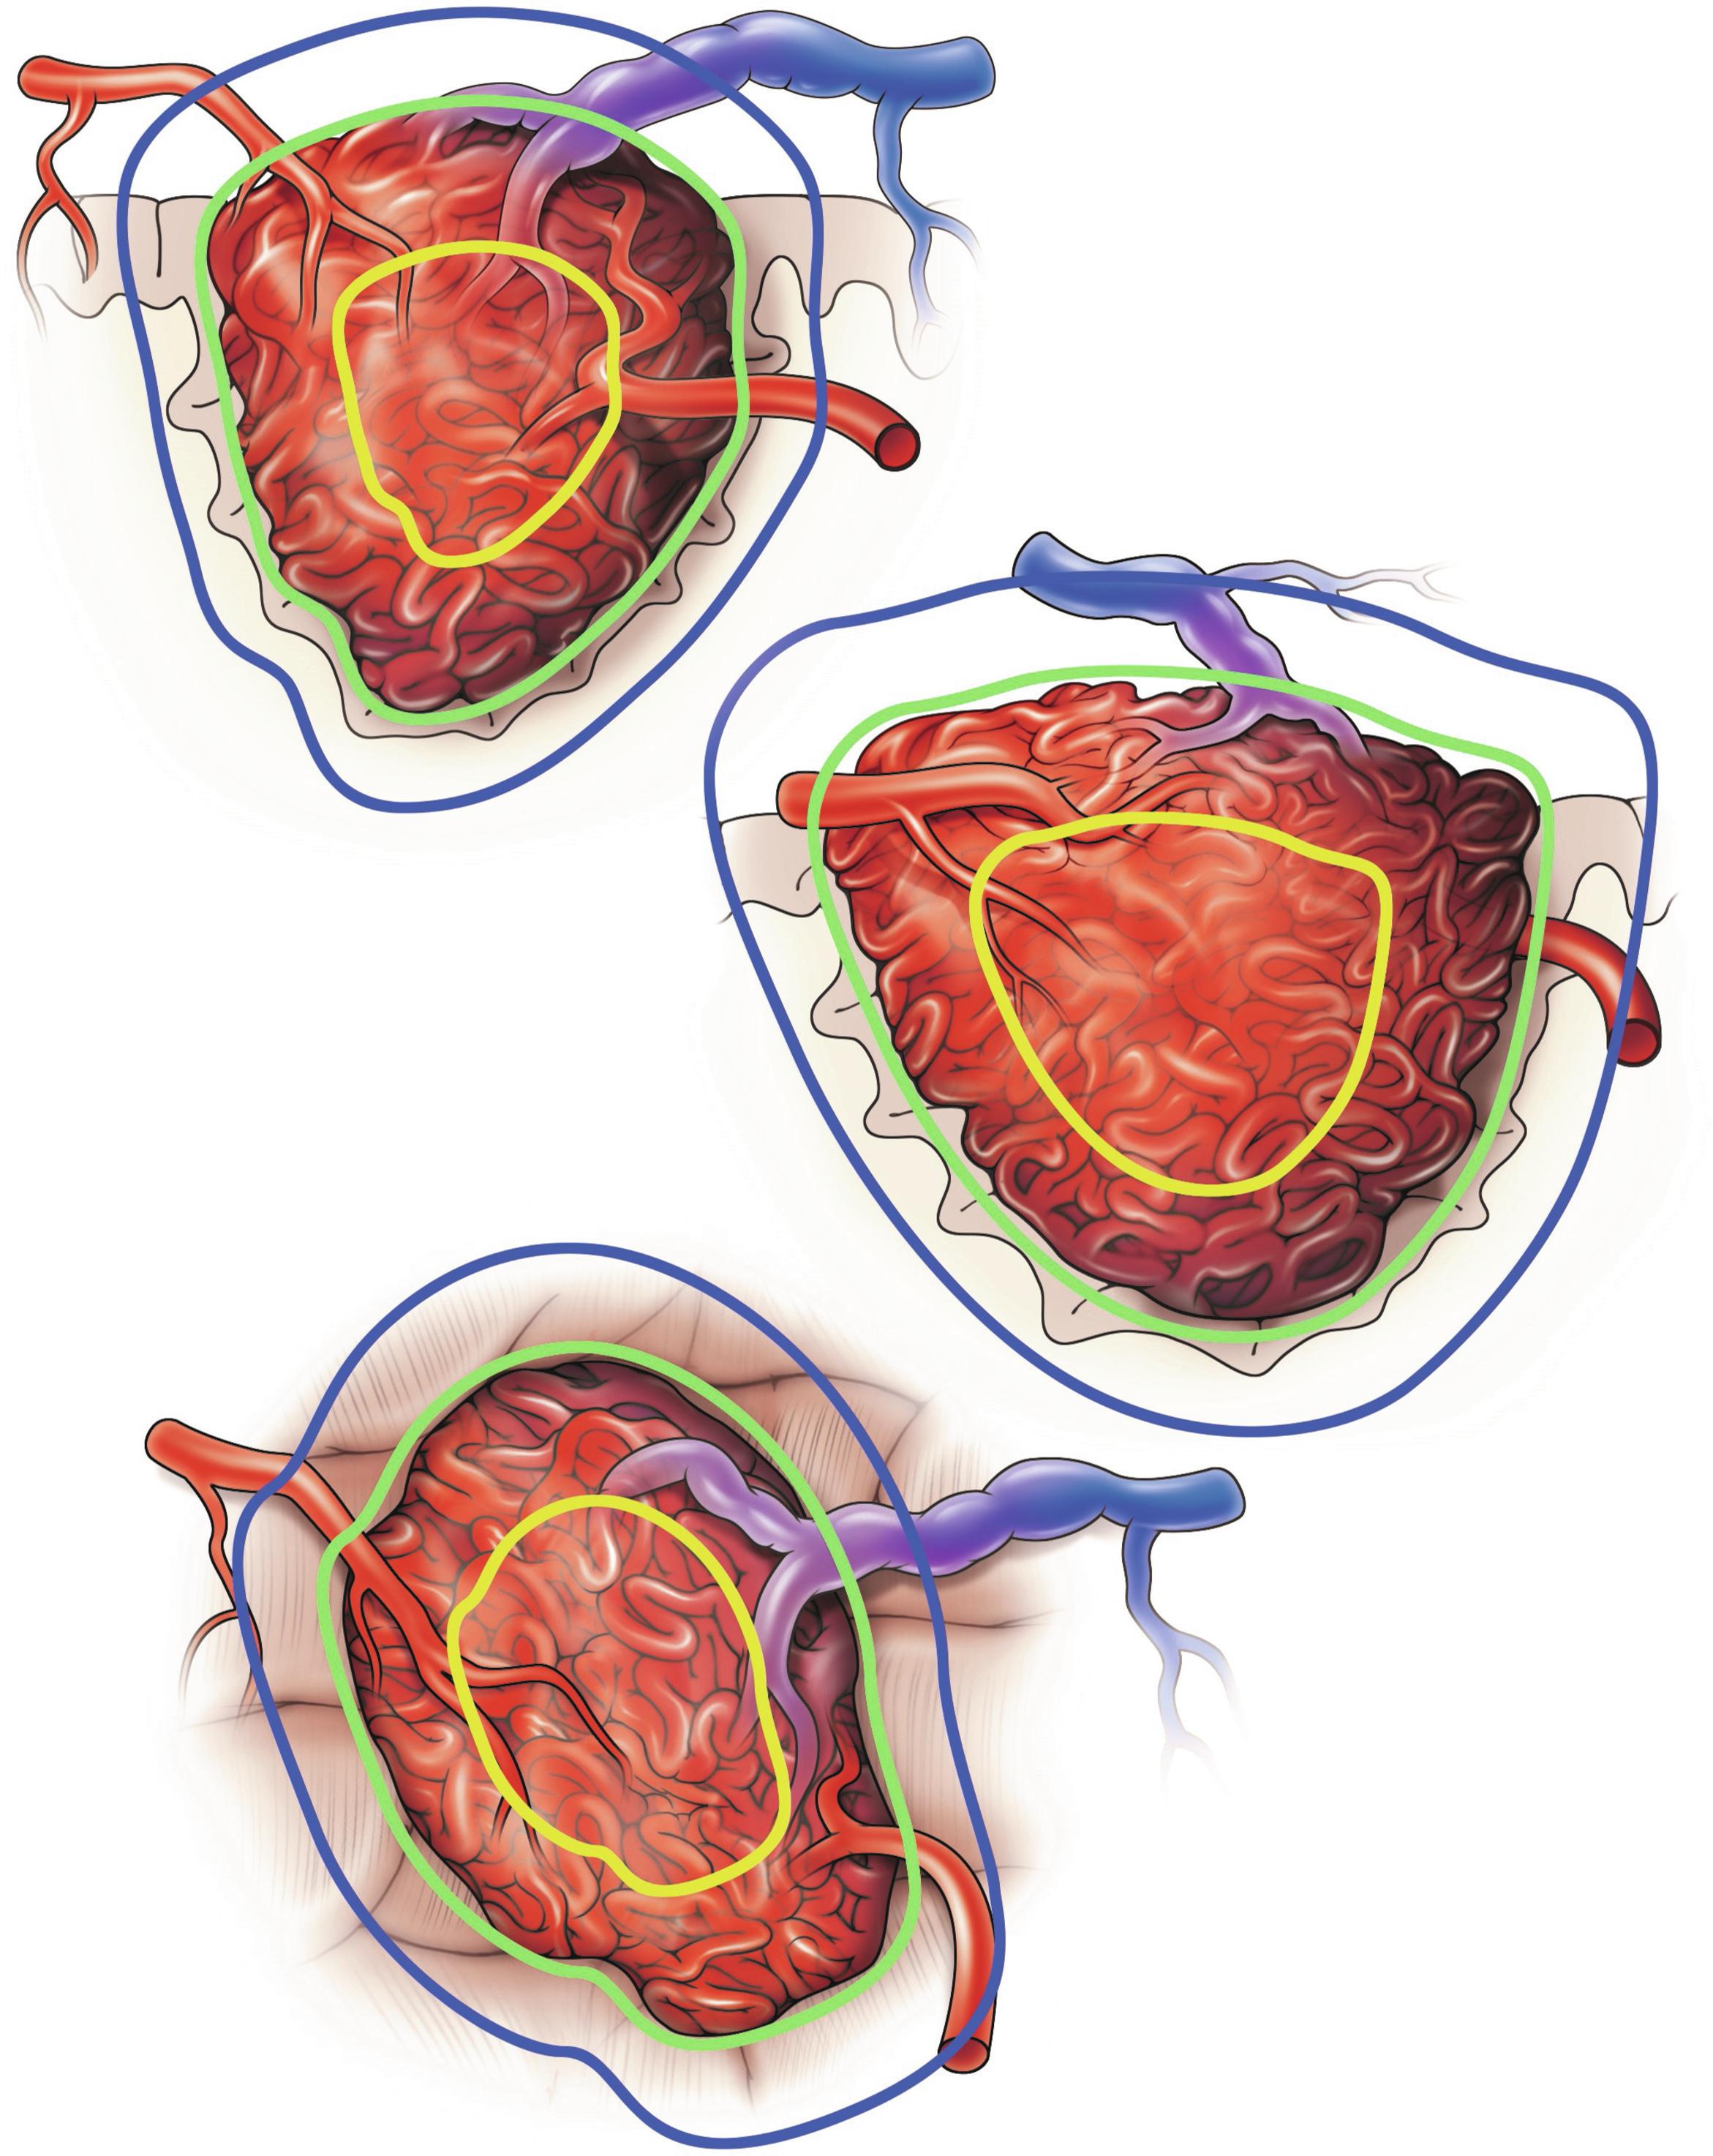 Fig. 40.1, Three views of a single AVM showing its components (arteries, interval nidus, and draining veins), with a desired targeting of the nidus and sparing of veins and surrounding cortex. For the purposes of stereotactic radiosurgery (SRS) planning, the 3D view allows a more complete understanding of the extent of an AVM than a 2D view does. These three views show the contours of the AVM from different angles, with the yellow outline showing the SRS capture. Delivering radiation at multiple angles allows healthy brain tissue to be spared during radiosurgical obliteration of the AVM.